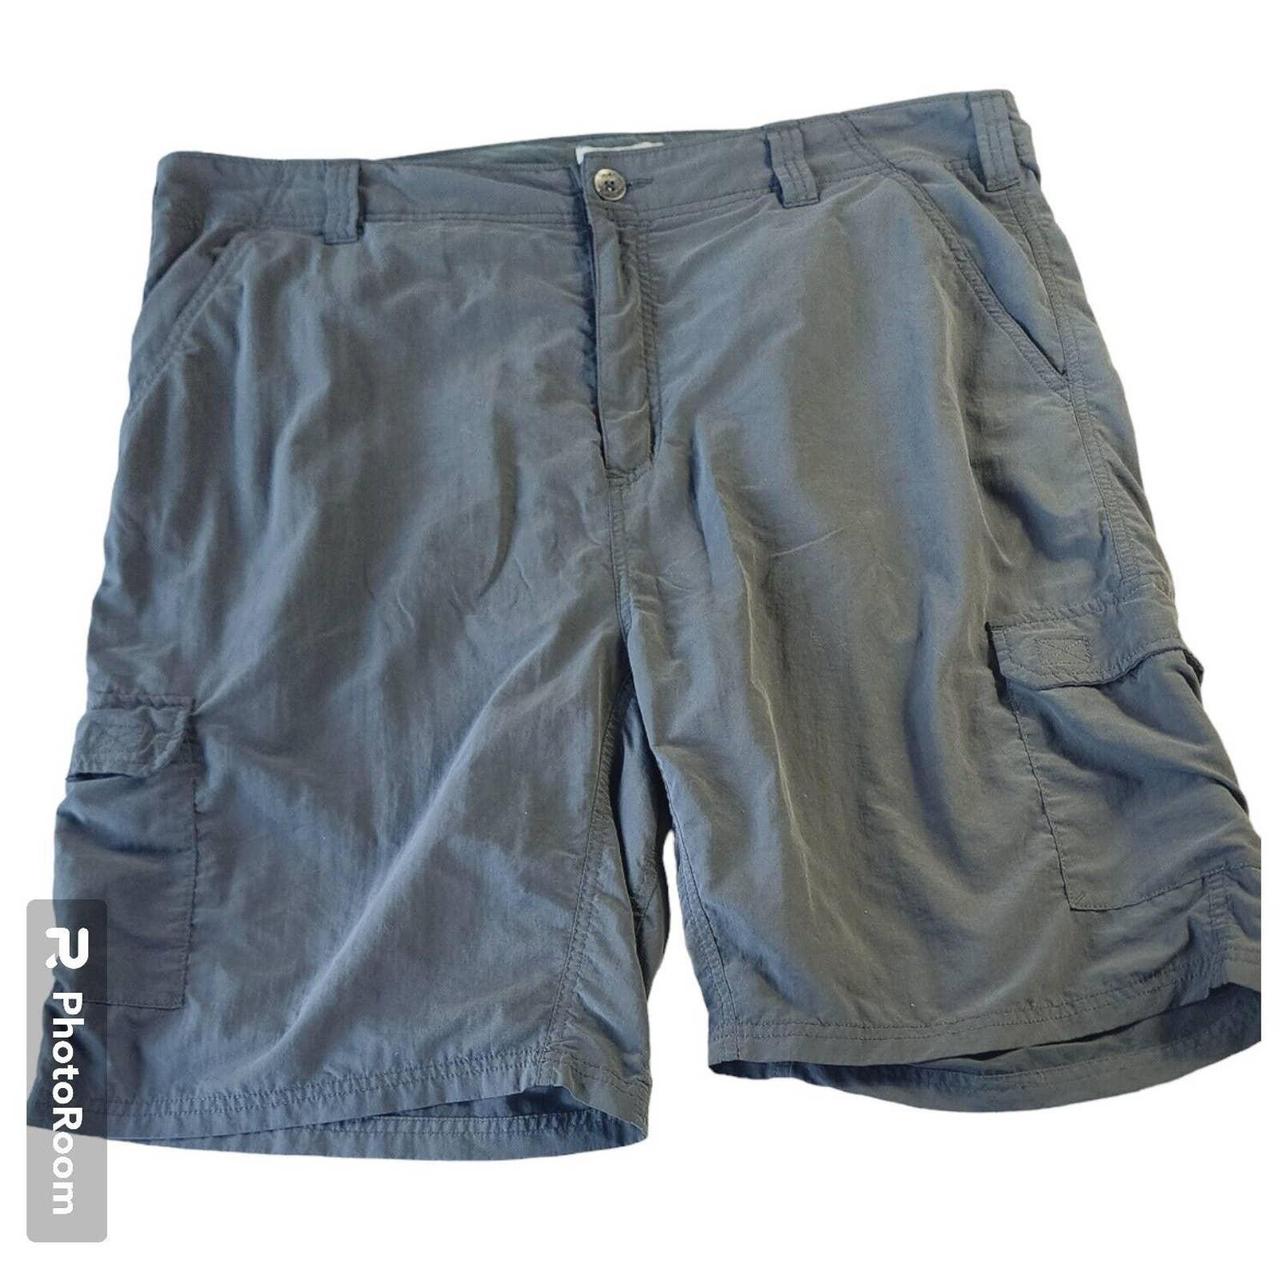 Orvis Size 40 Cargo Shorts Performance quick dry - Depop